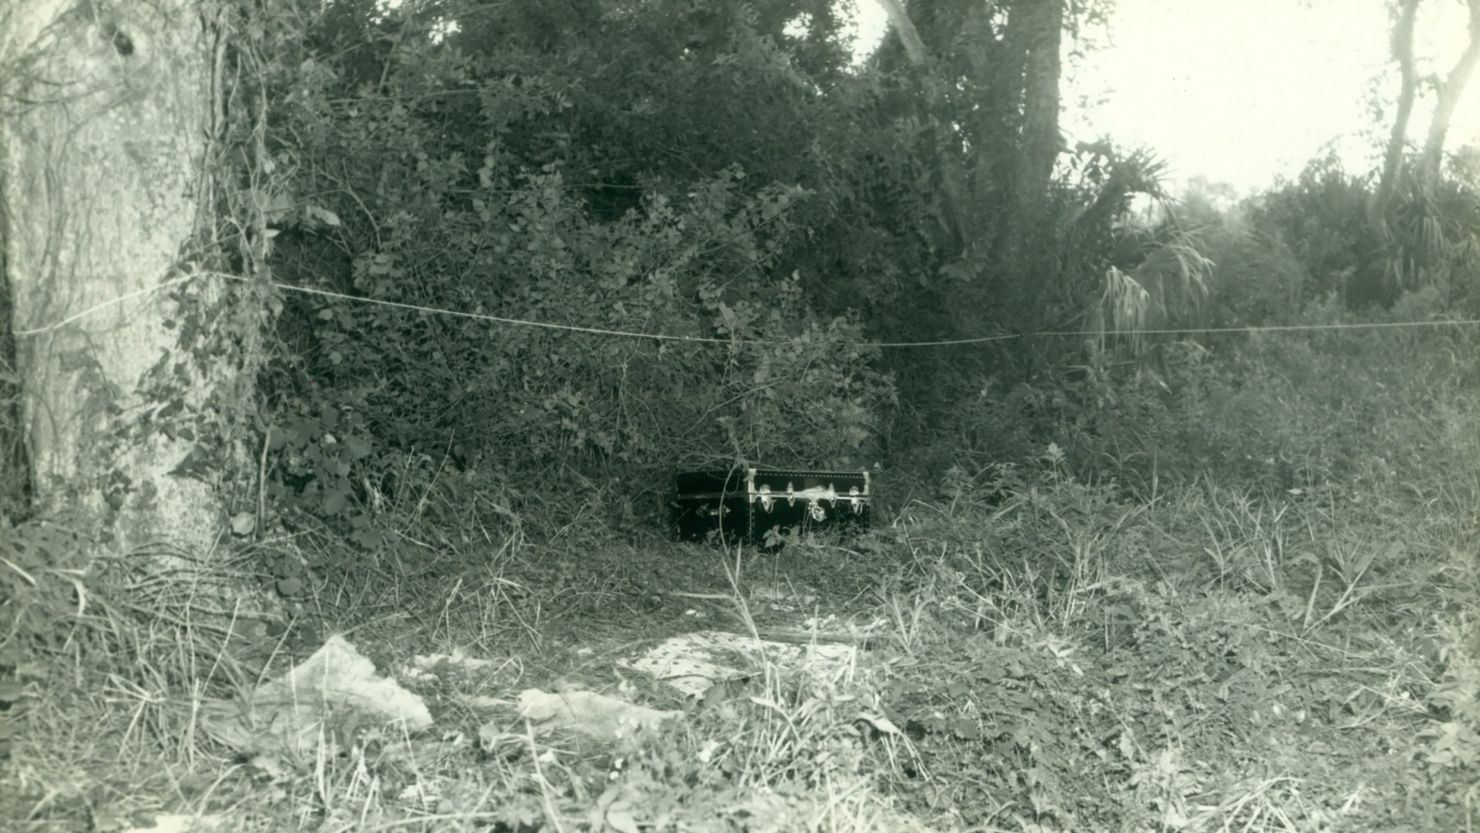 The trunk was found in a wooded area on October 31, 1969. 